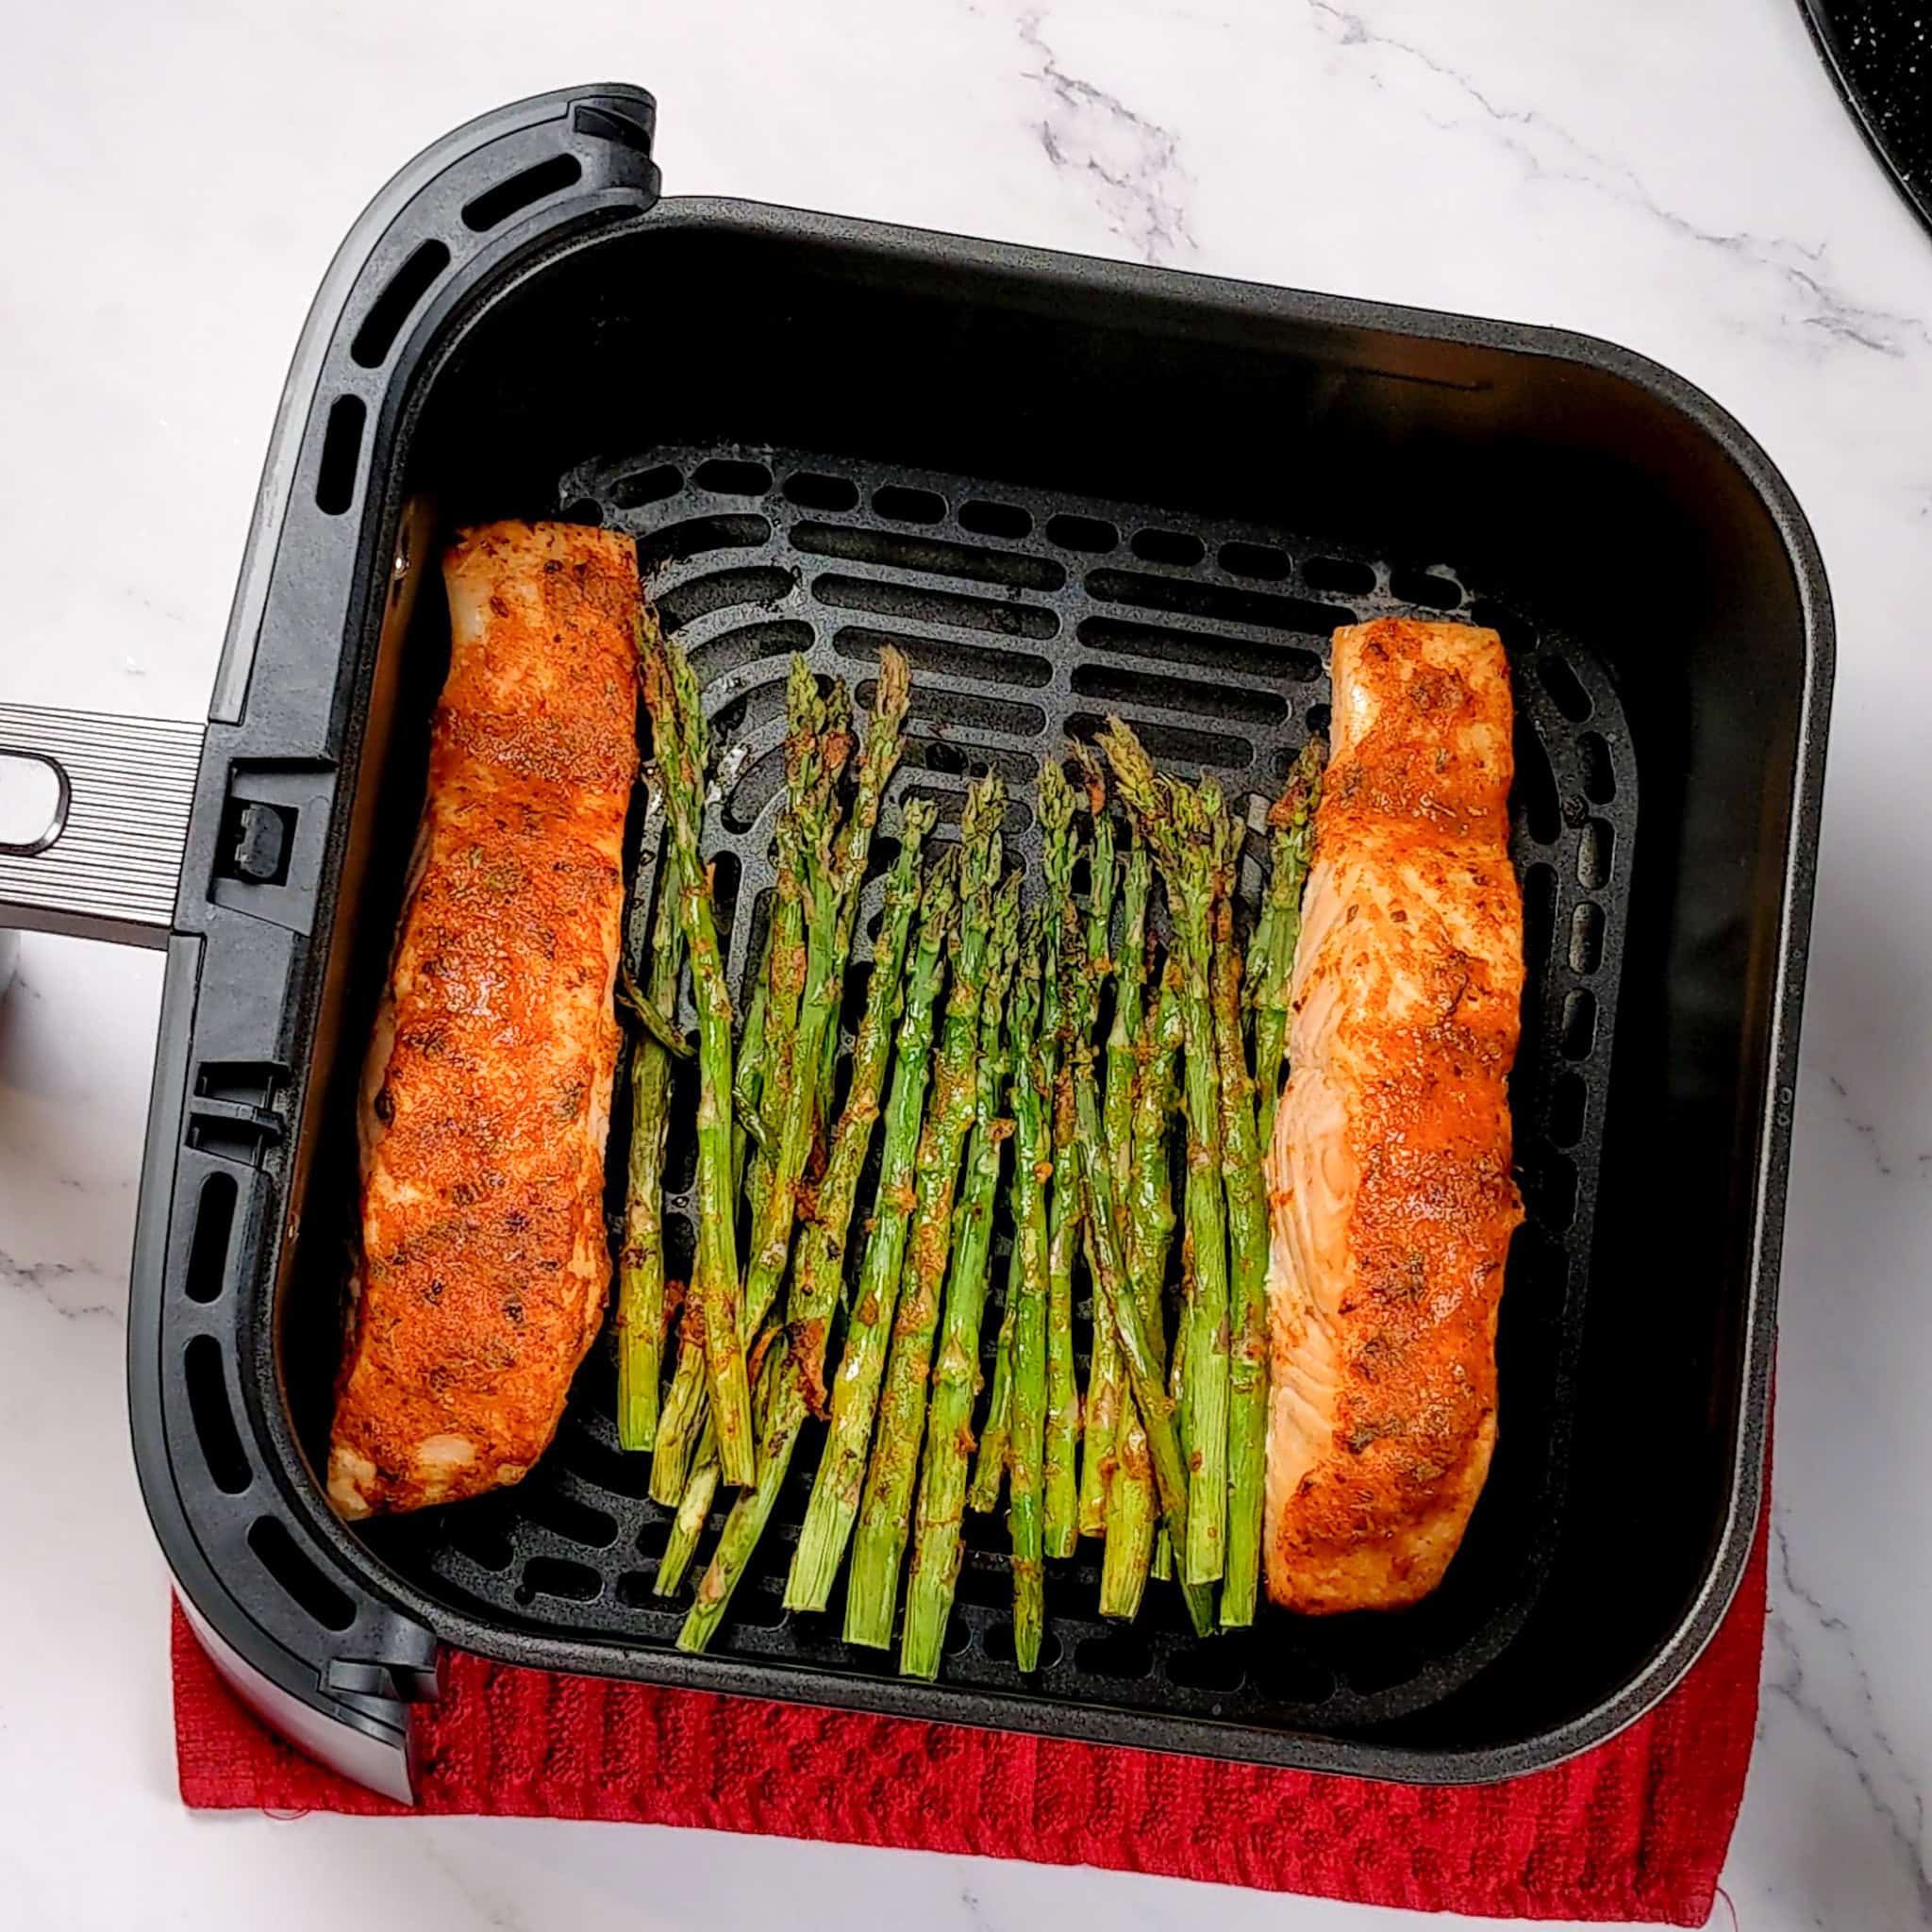 The cooked asparagus and salmon in a the air fryer basket, resting on a square kitchen towel.